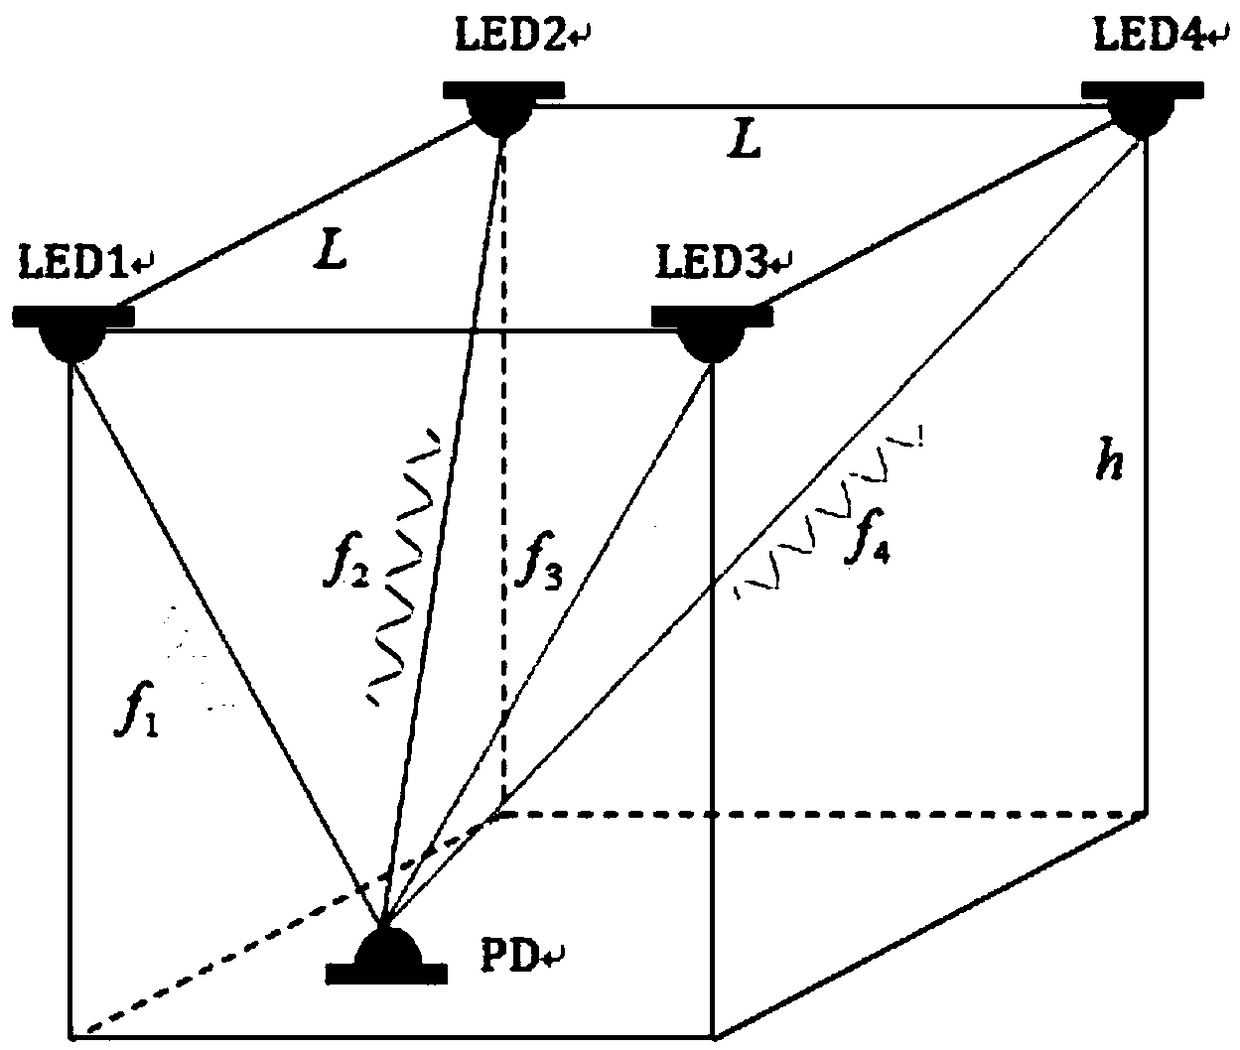 Indoor visible light positioning method based on neural network and received signal intensity